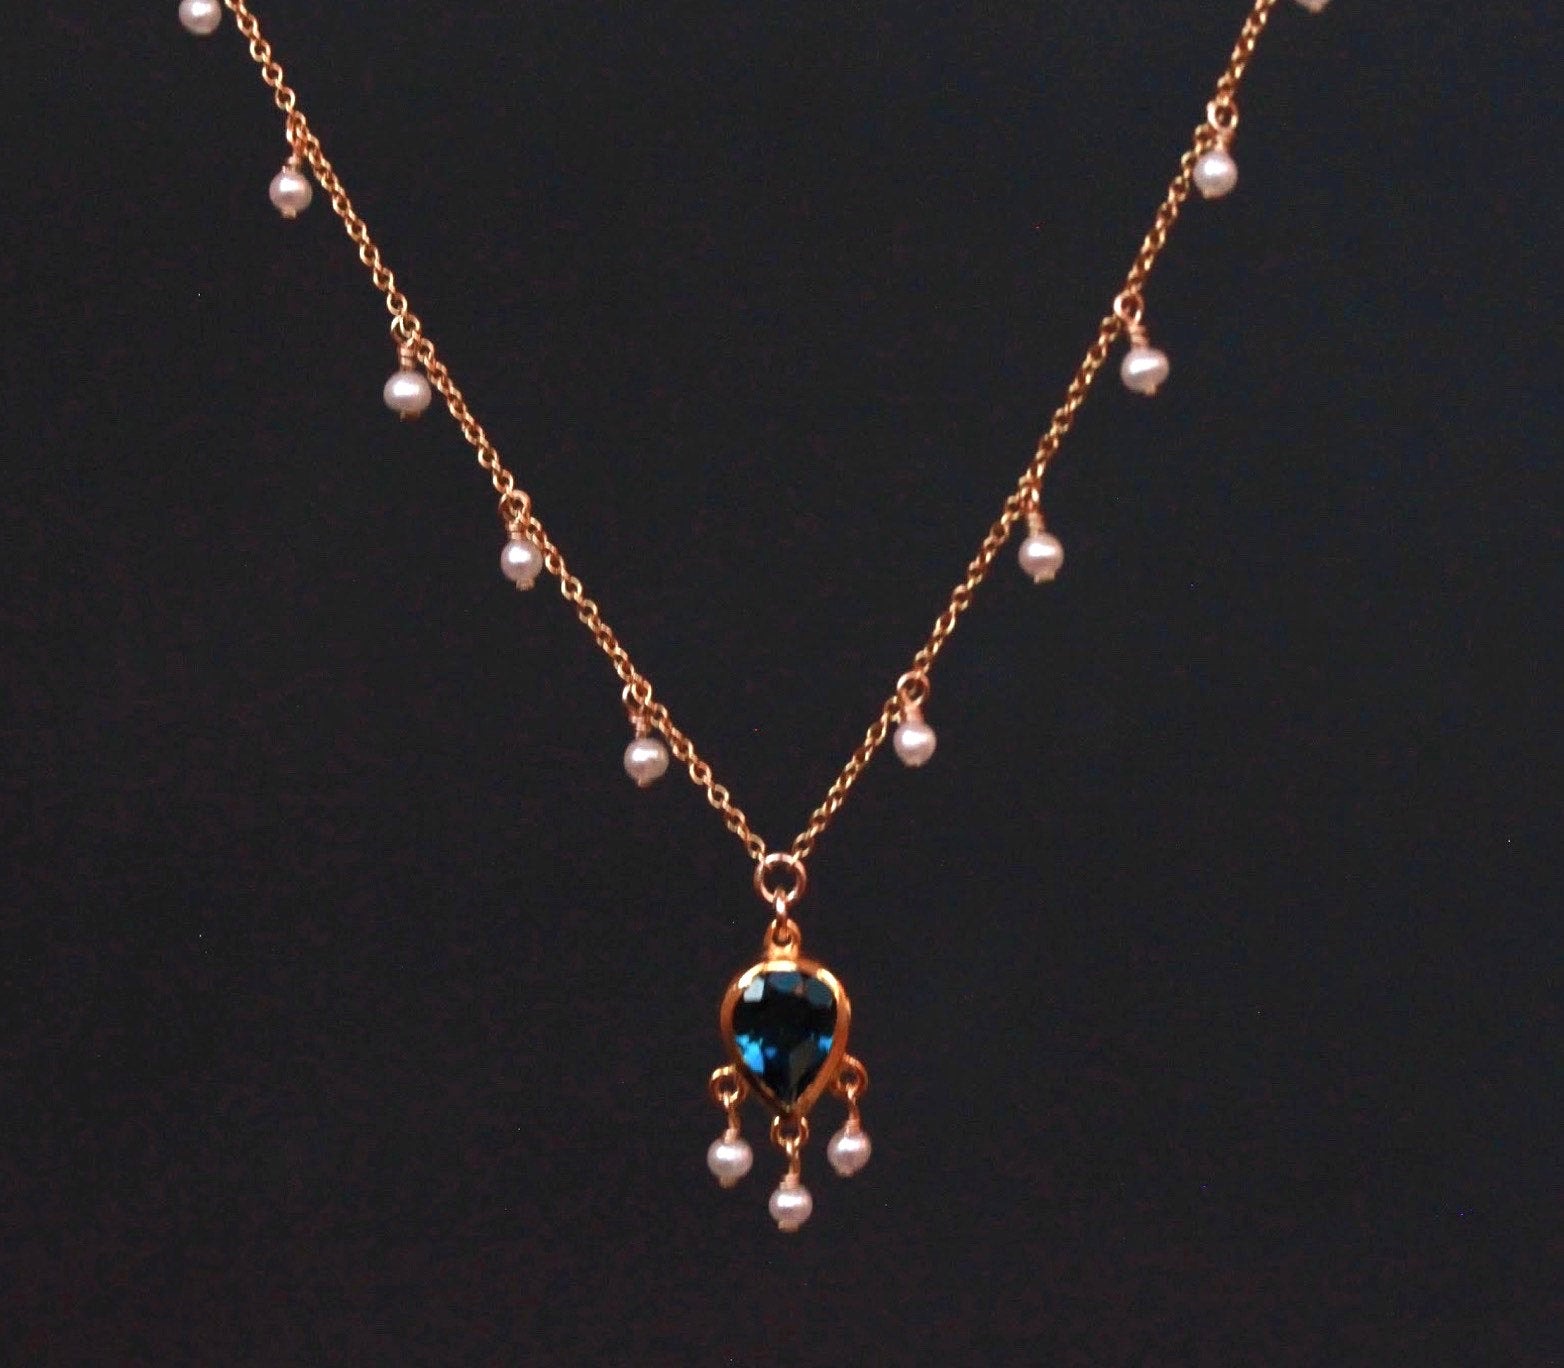 London Topaz Necklace with Seed Pearls